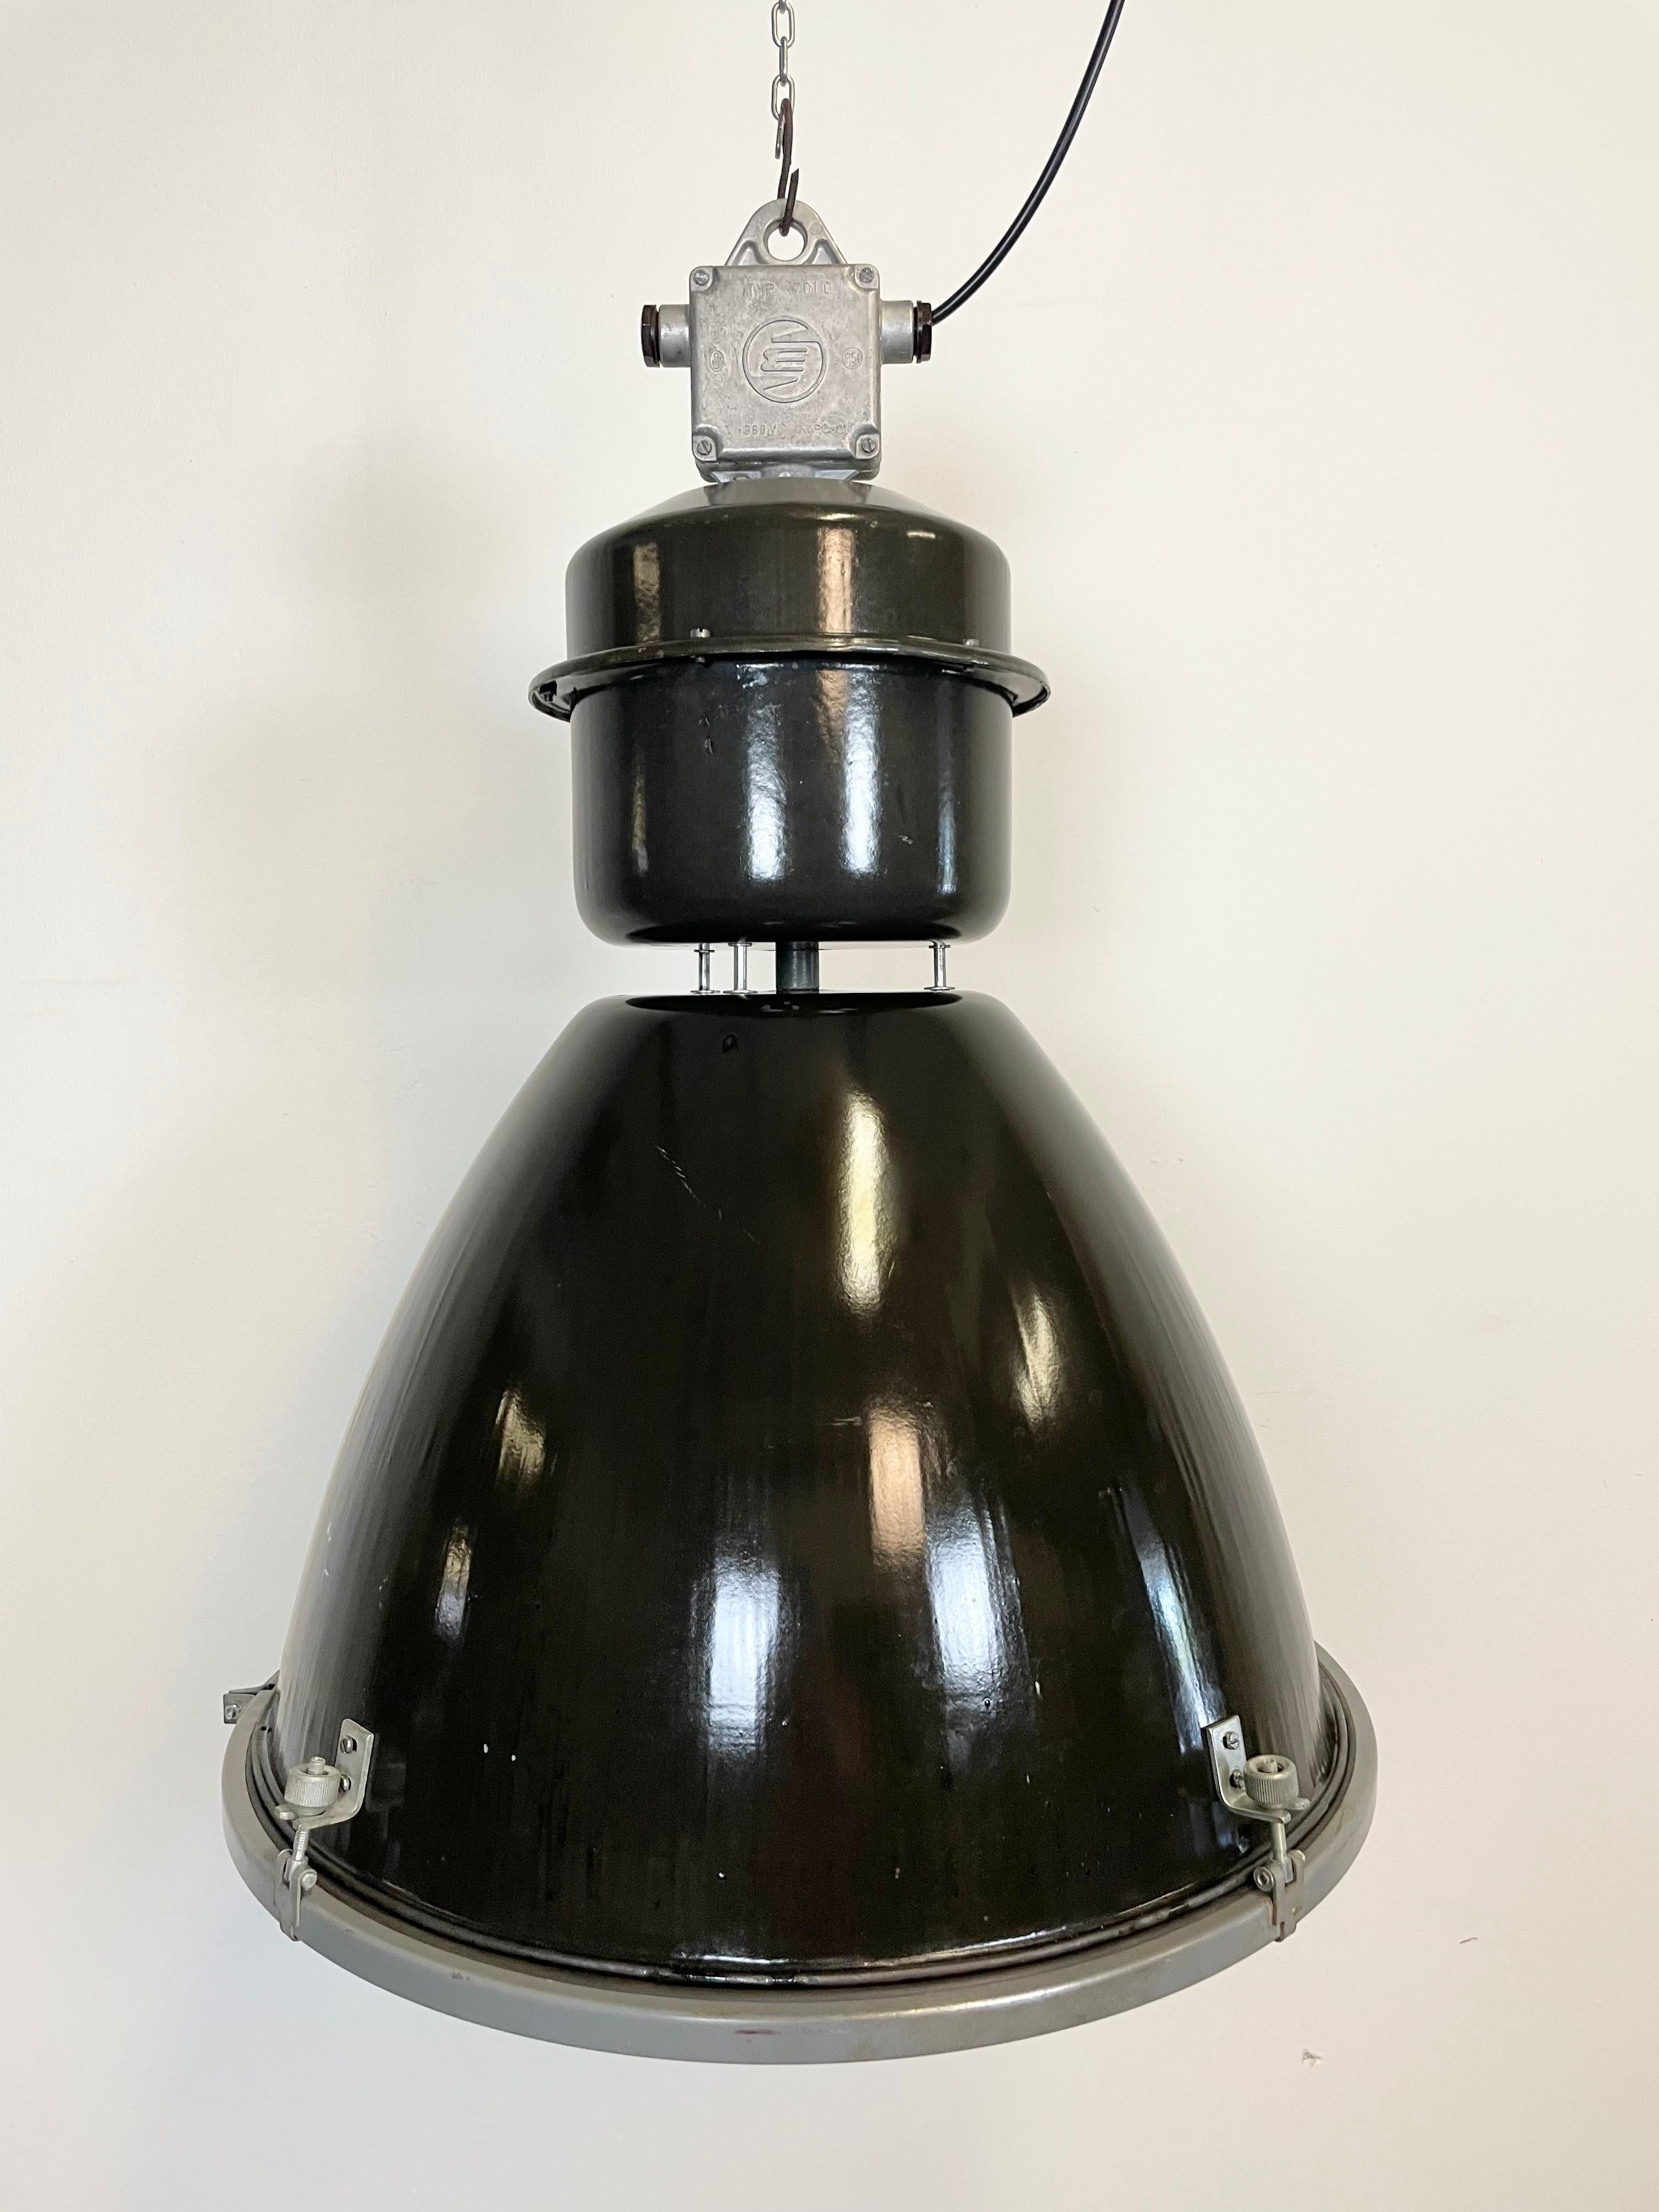 This black industrial pendant light was designed in the 1960s and produced by Elektrosvit in the former Czechoslovakia. It features a cast aluminium top, a black enamel exterior, a white enamel interior and clear glass cover.
New porcelain socket